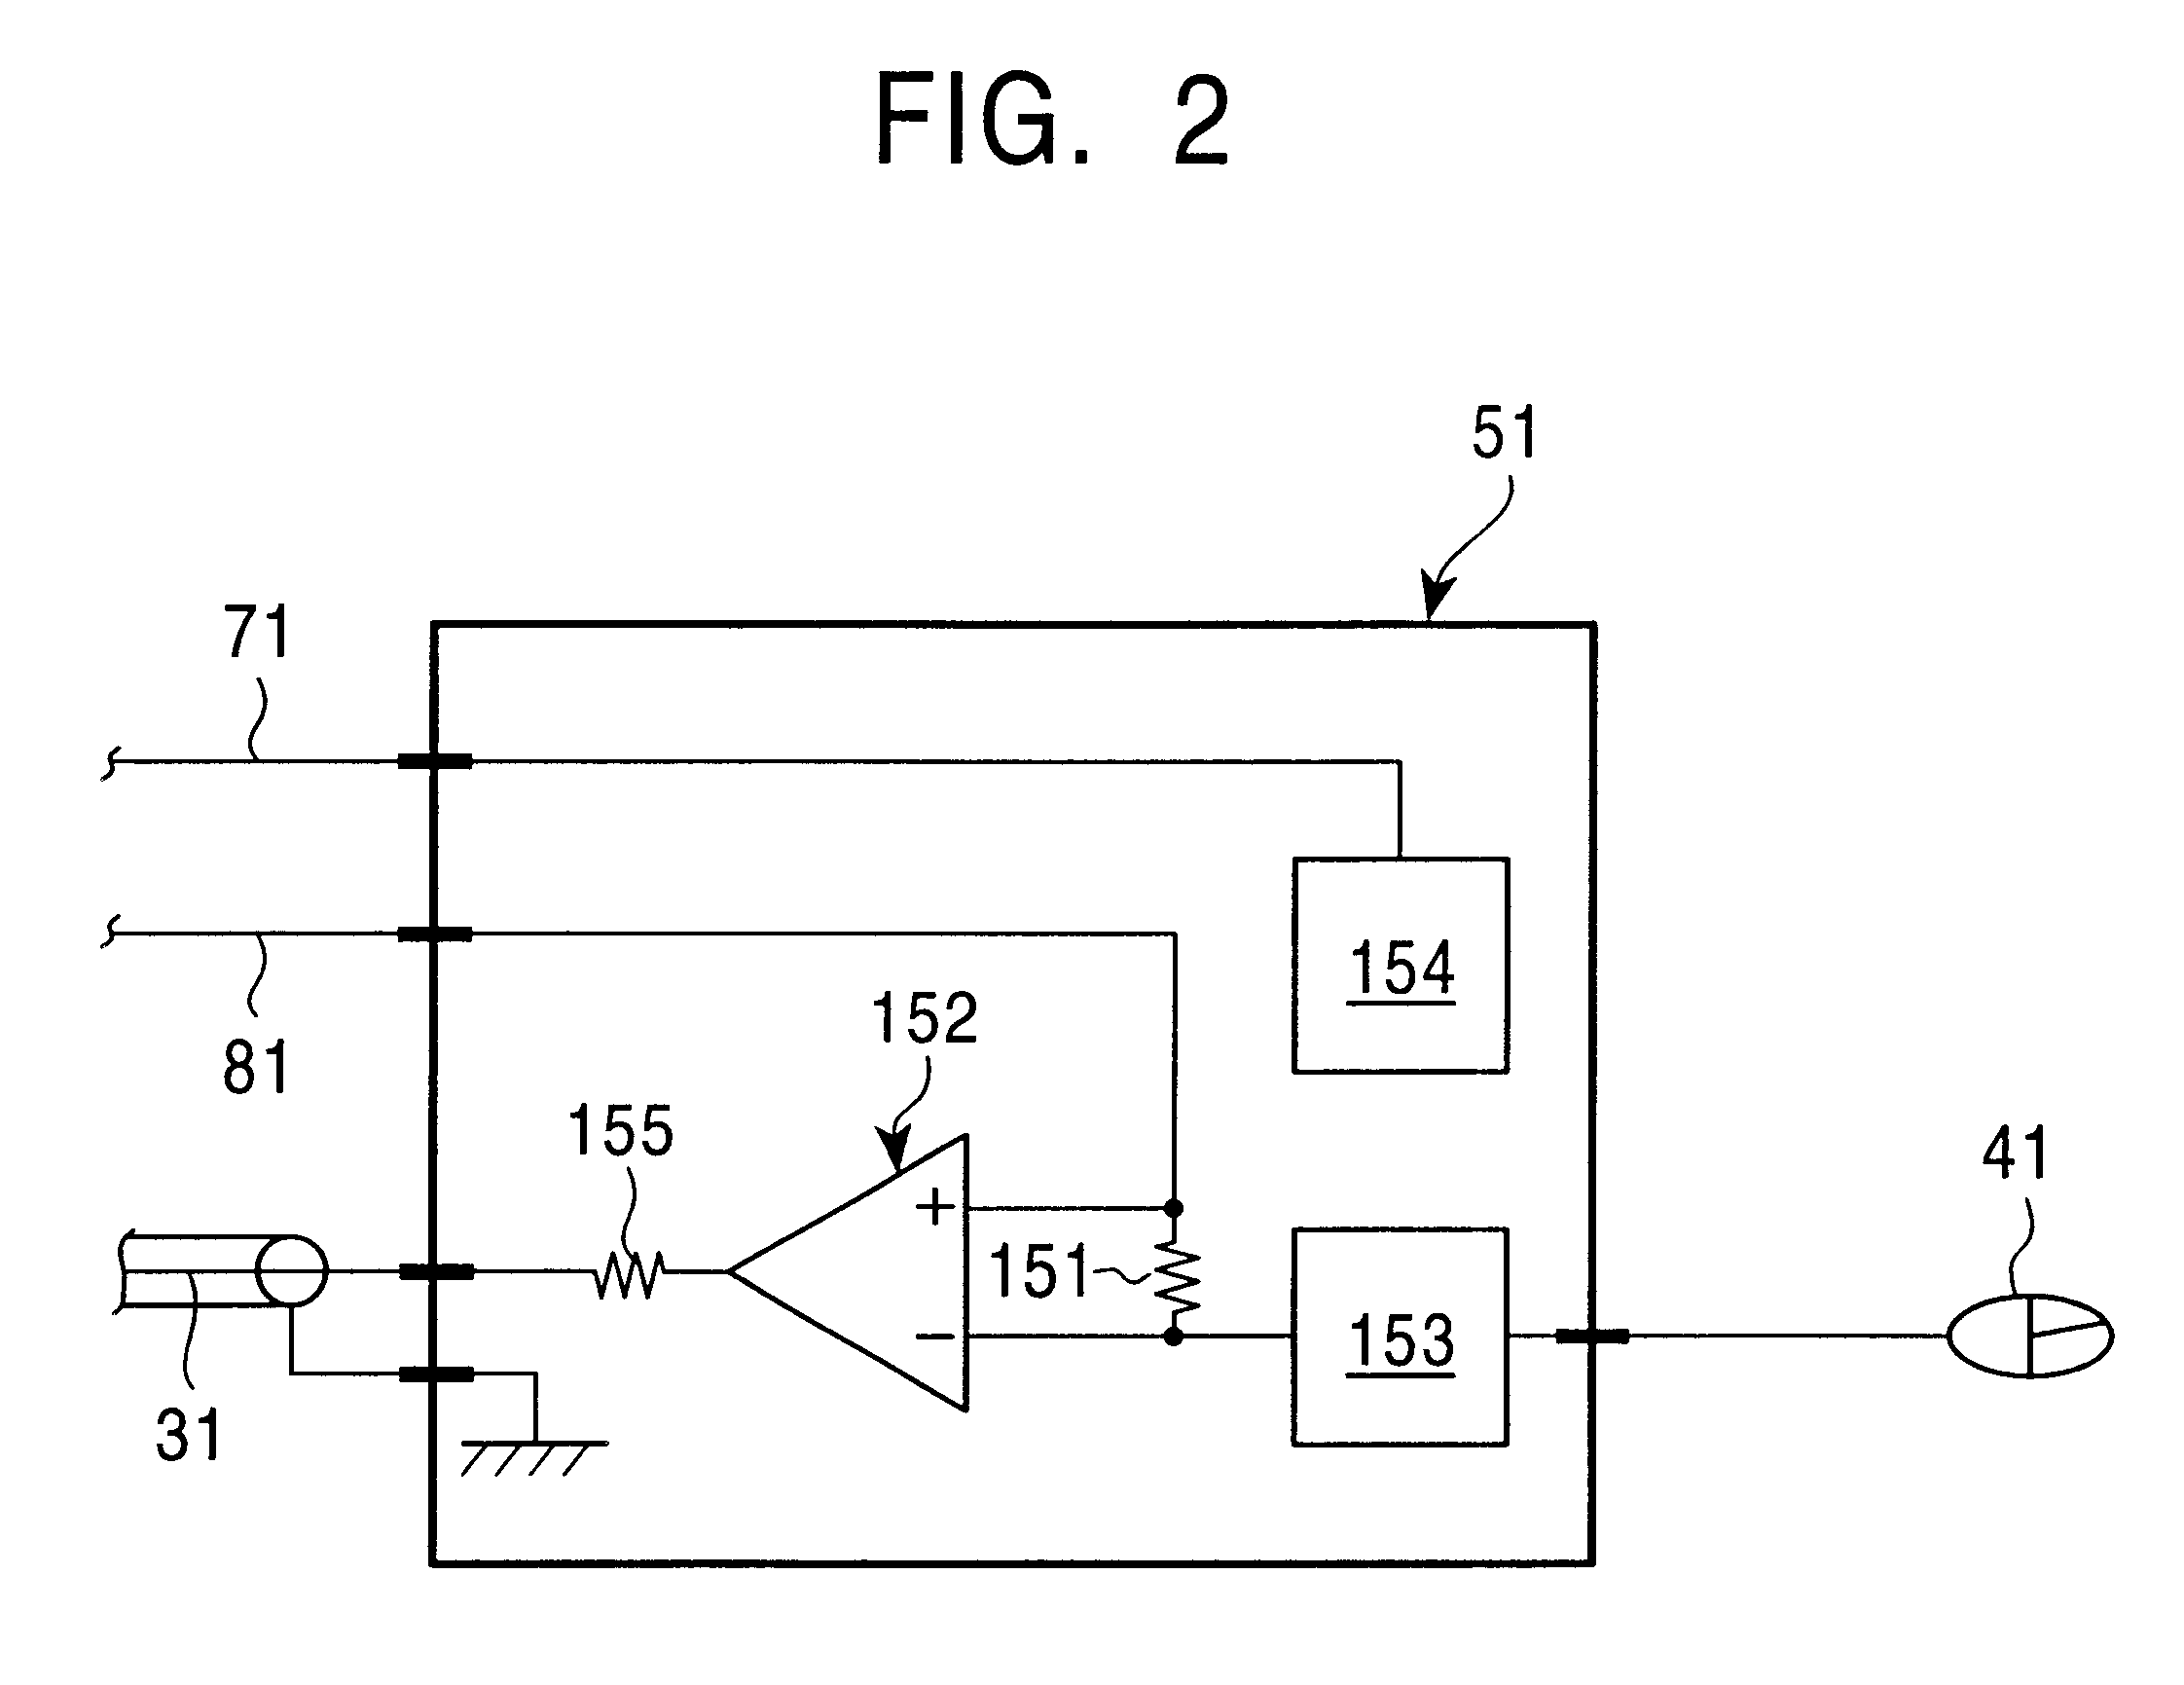 Apparatus for measuring the bioelectrical impedance of a living body